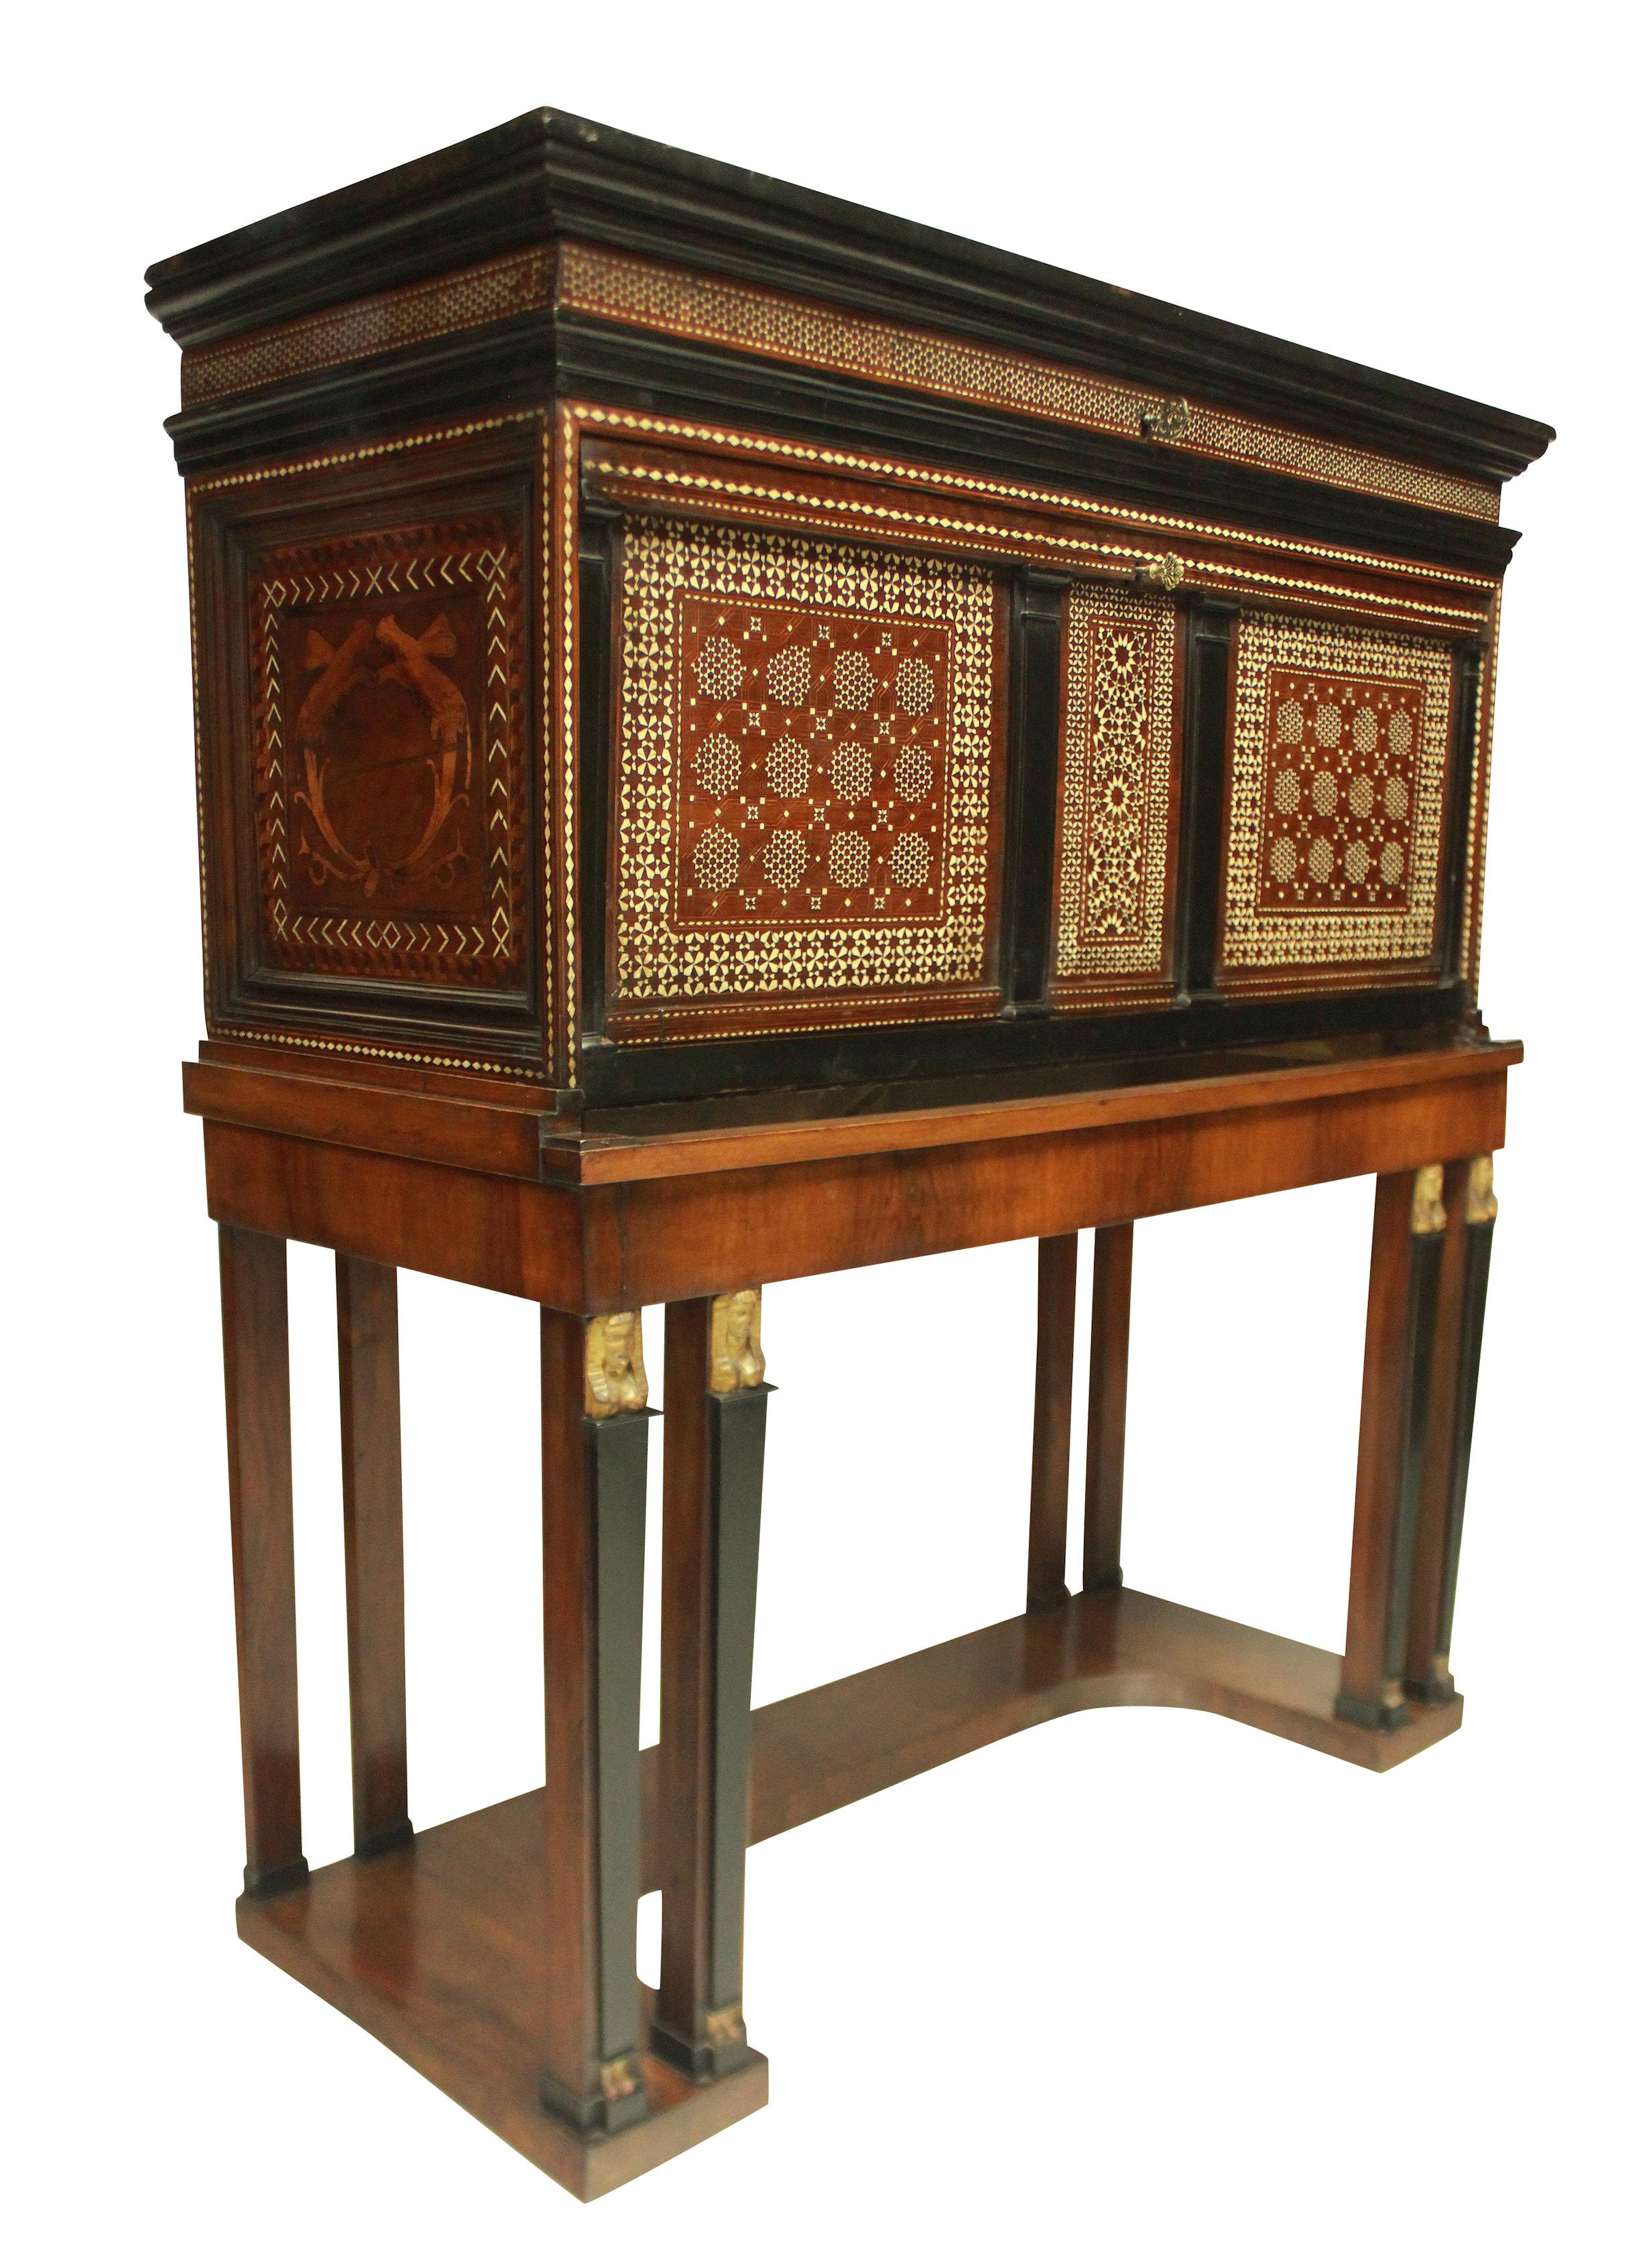 A fine Spanish Vargueno cabinet on stand in the Moorish taste, beautifully inlaid both inside and out with bone in geometric patterns and stylized beasts to the sides. The inside with compartments and a fall front writing slope and a lockable